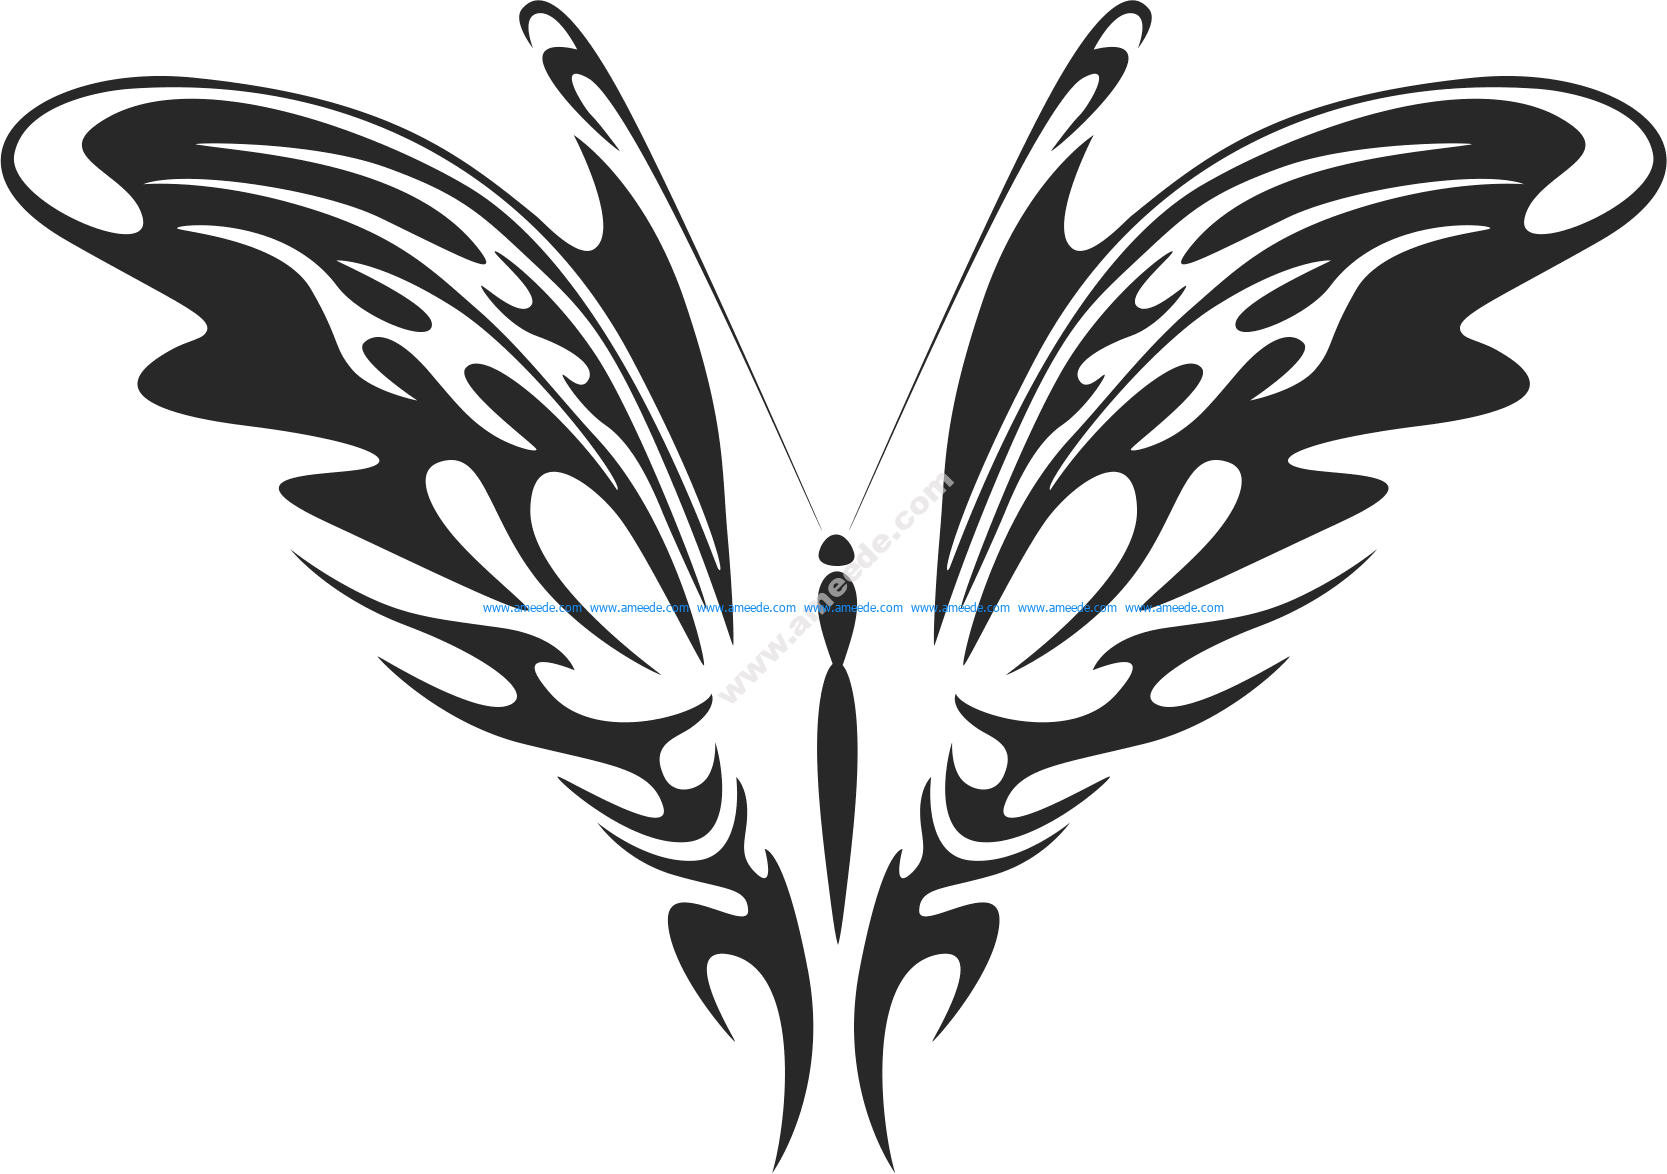 Download Tribal Butterfly Vector Art 26 - Download Free Vector